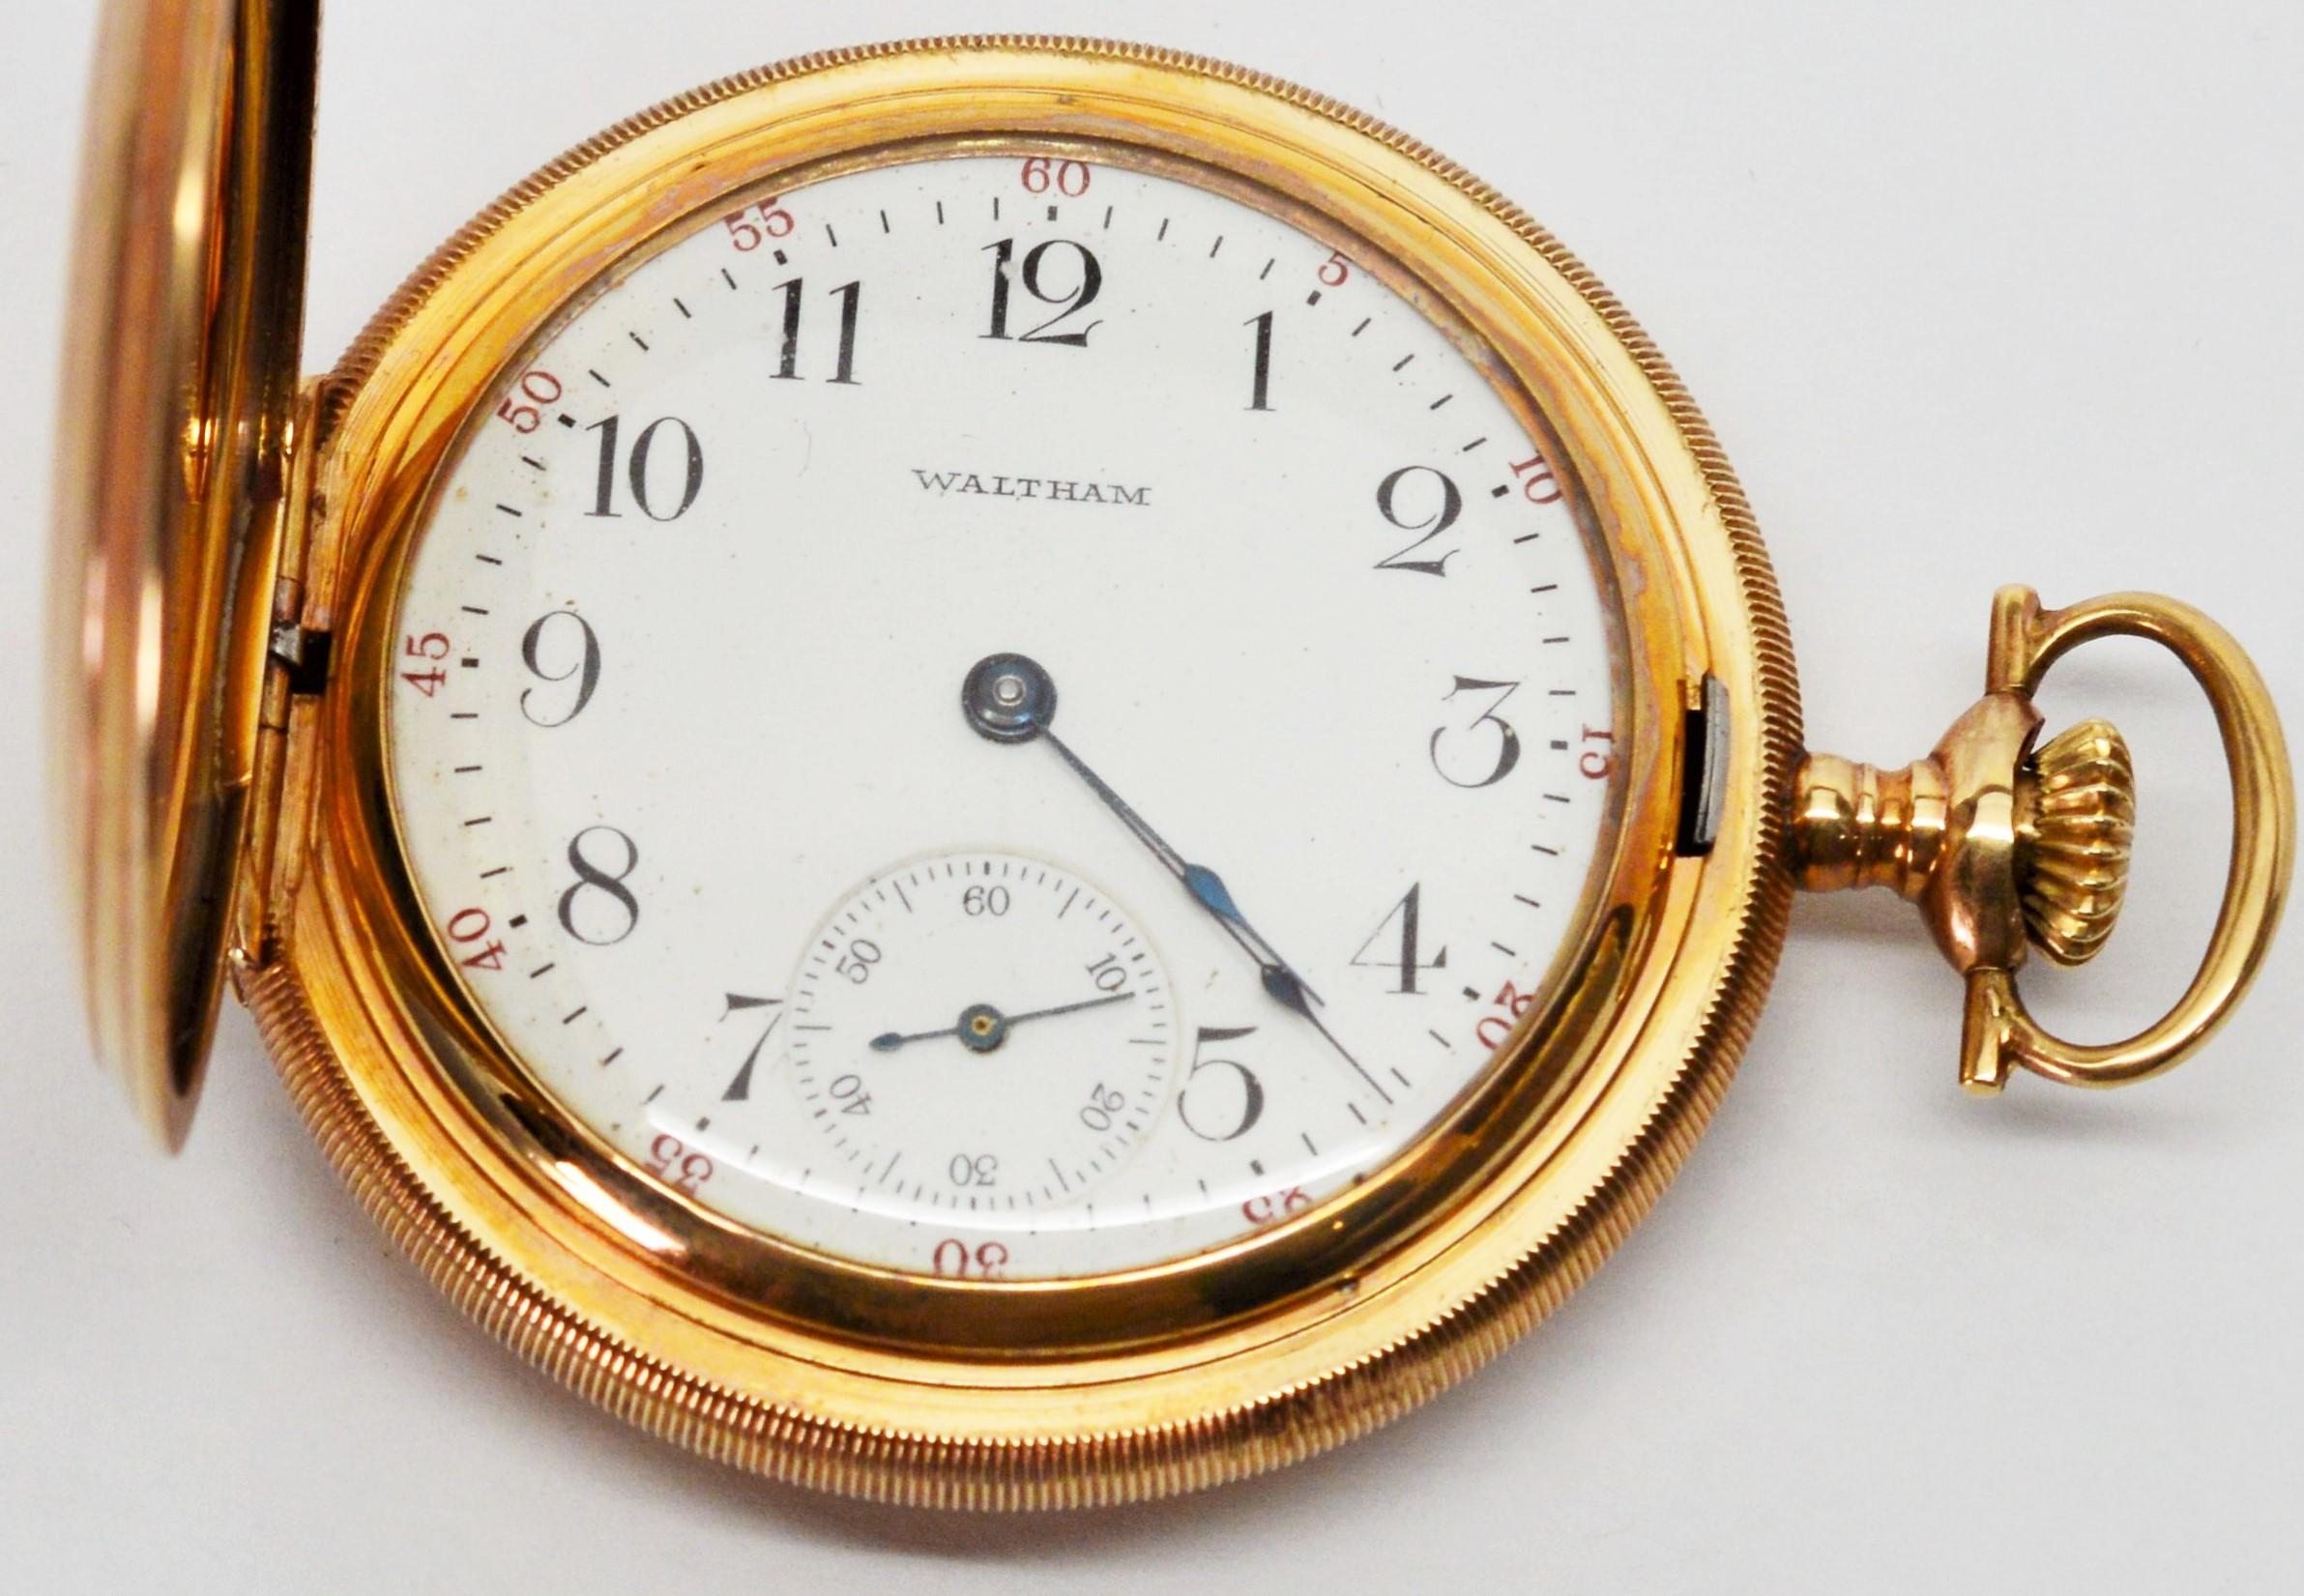 Circa 1913, American Waltham & Company 52mm fourteen karat 14K yellow gold pocket watch with hunting case model number 1908. Medallion style engraved design. Fifteen jeweled, grade 620 acid etched movement.  3/4 plate breguet movement number